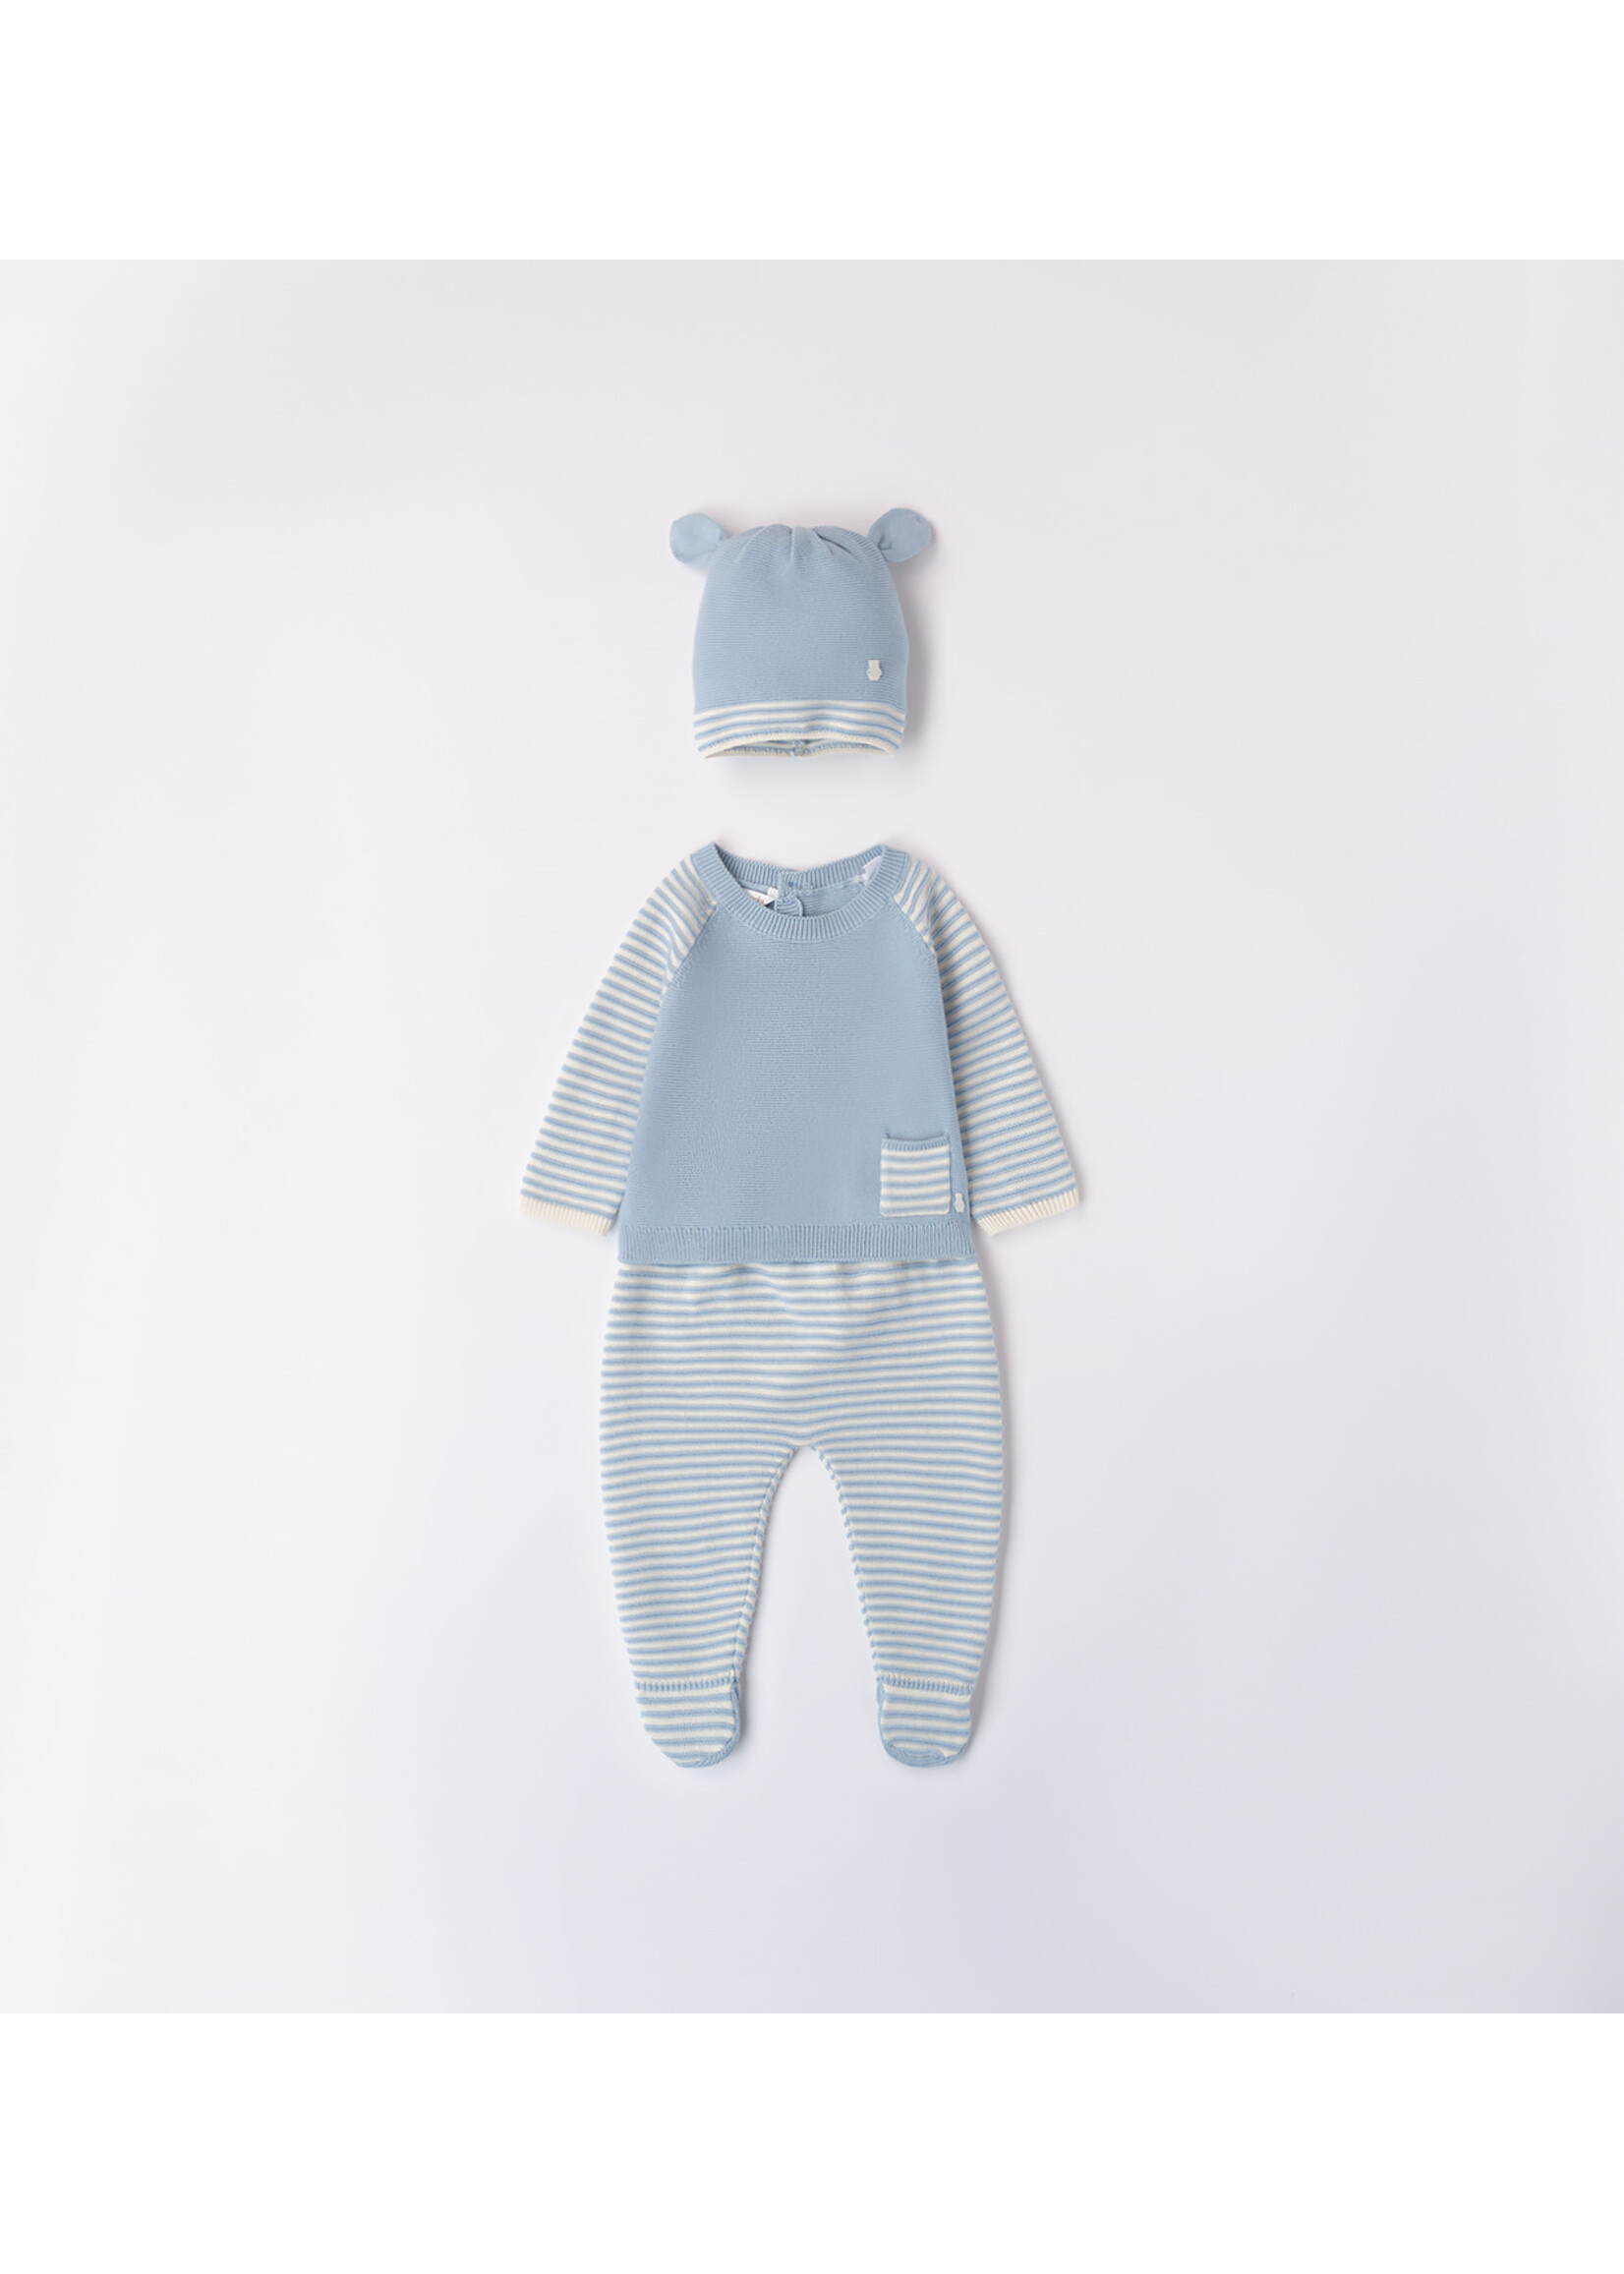 Ido 38617 TWO PIECES ROMPERS SUIT WITH FEET BLUE